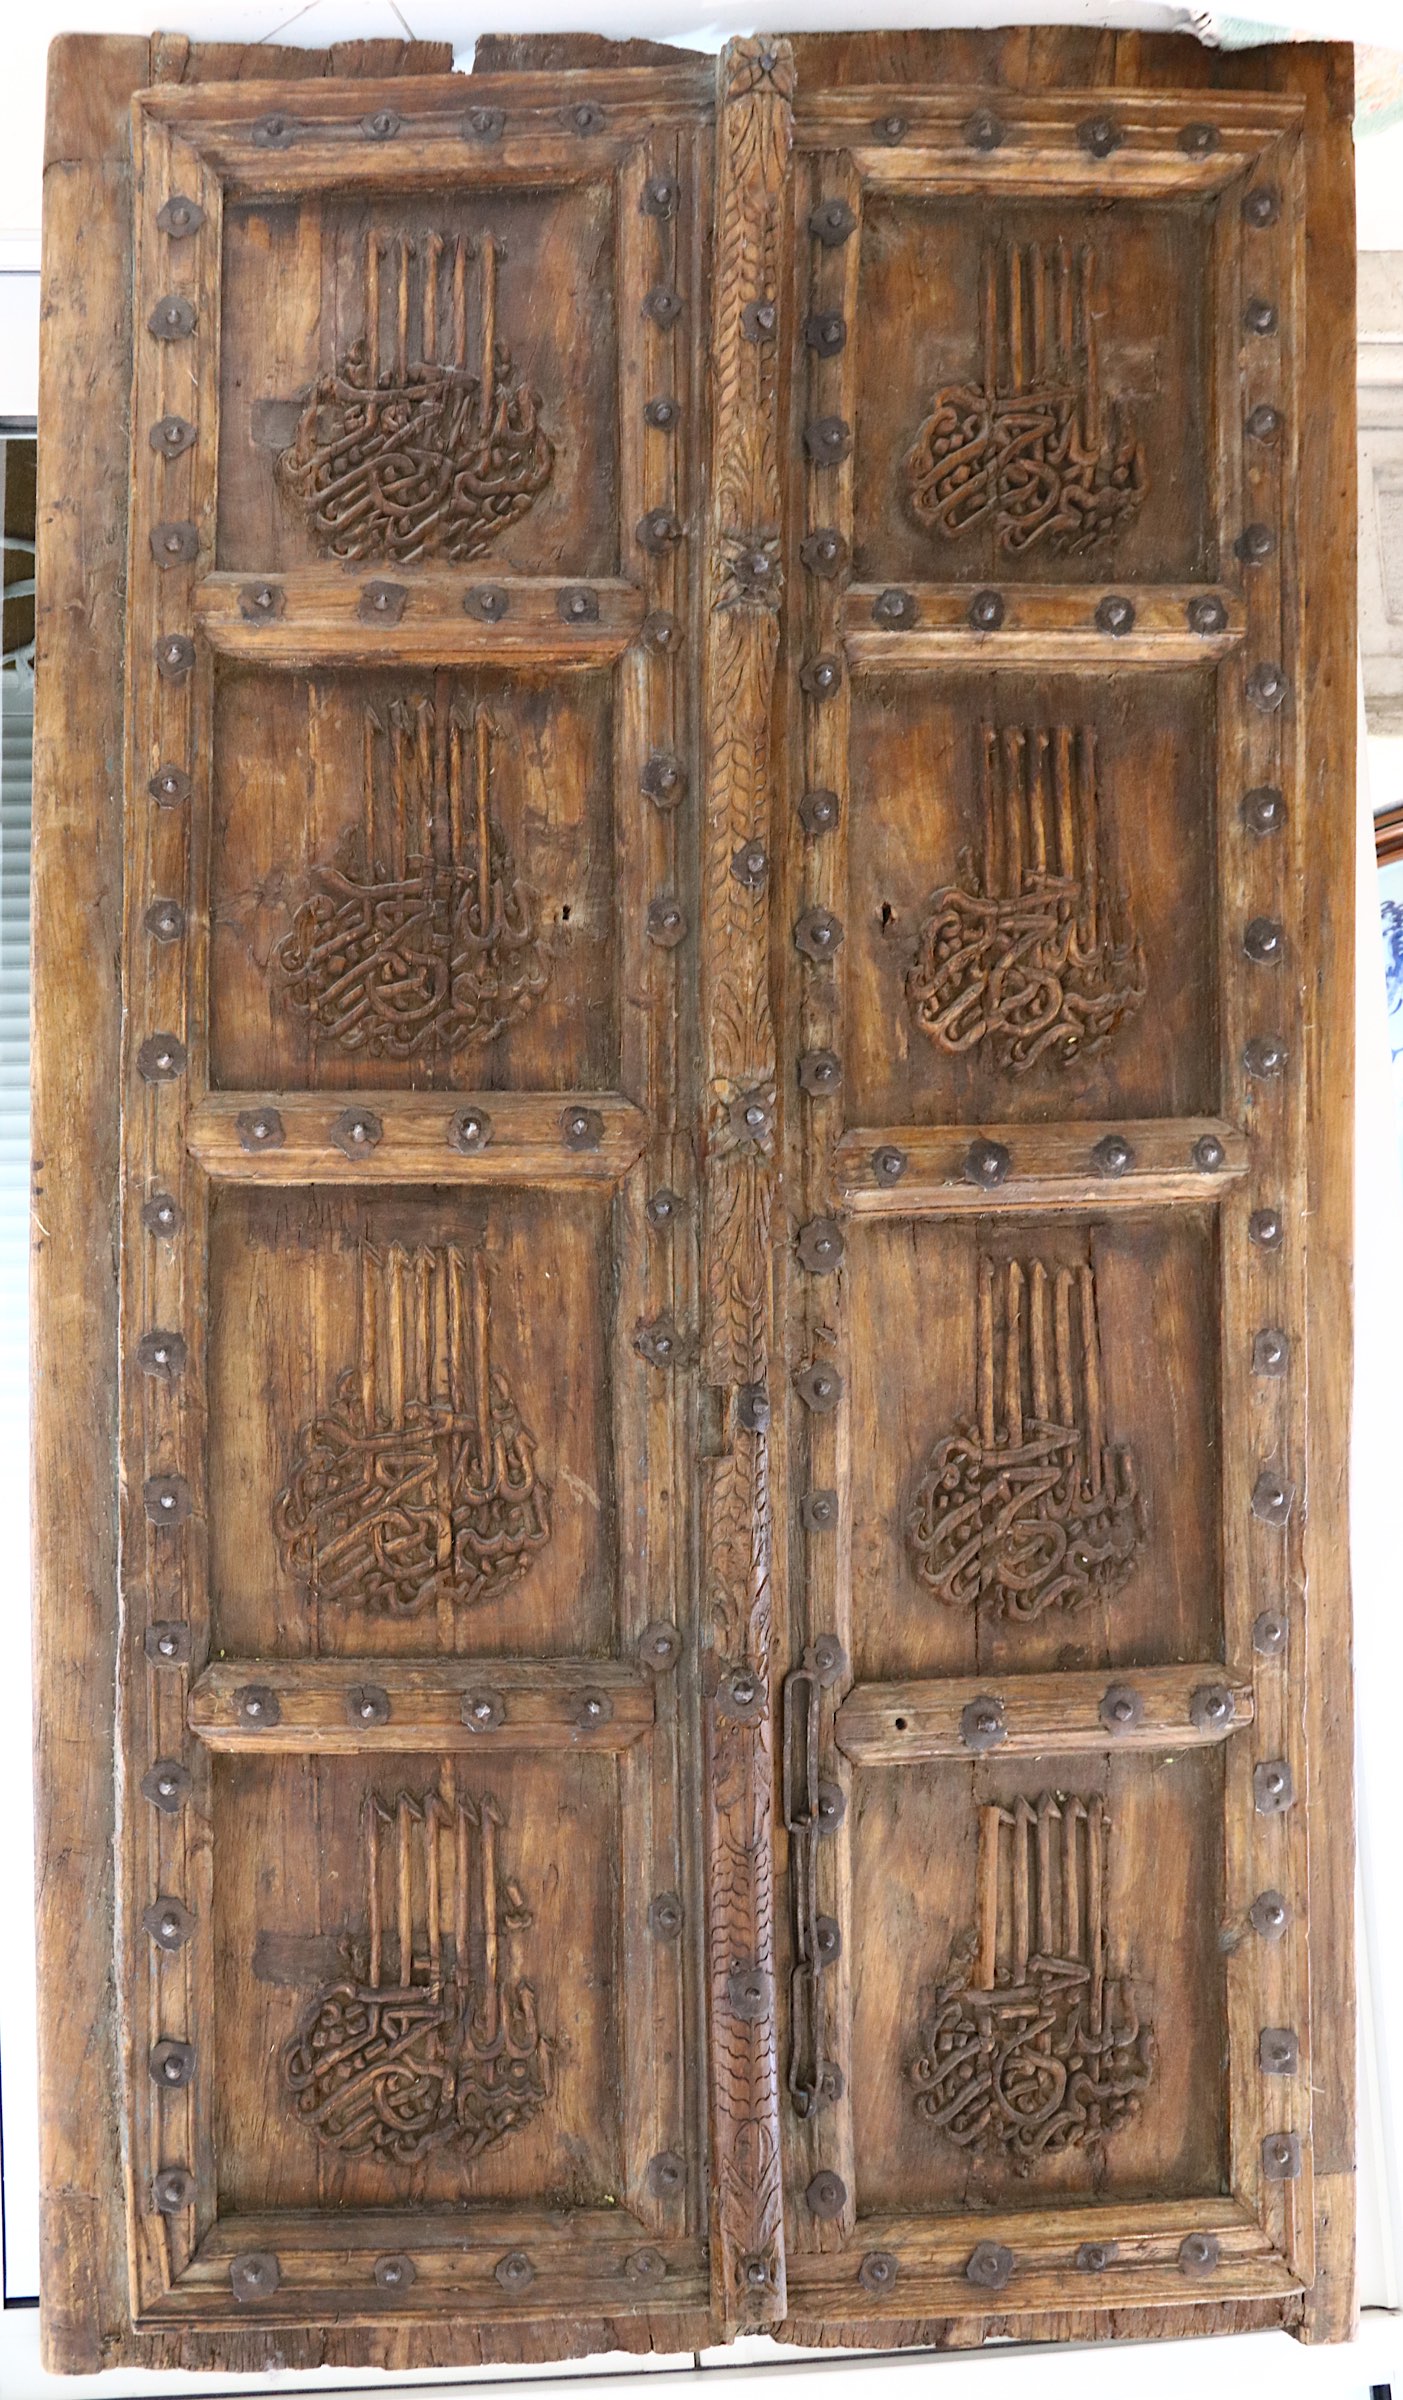 A monumental pair of carved Islamic doors with surrounding portal, 18th or 19th Century, both carved